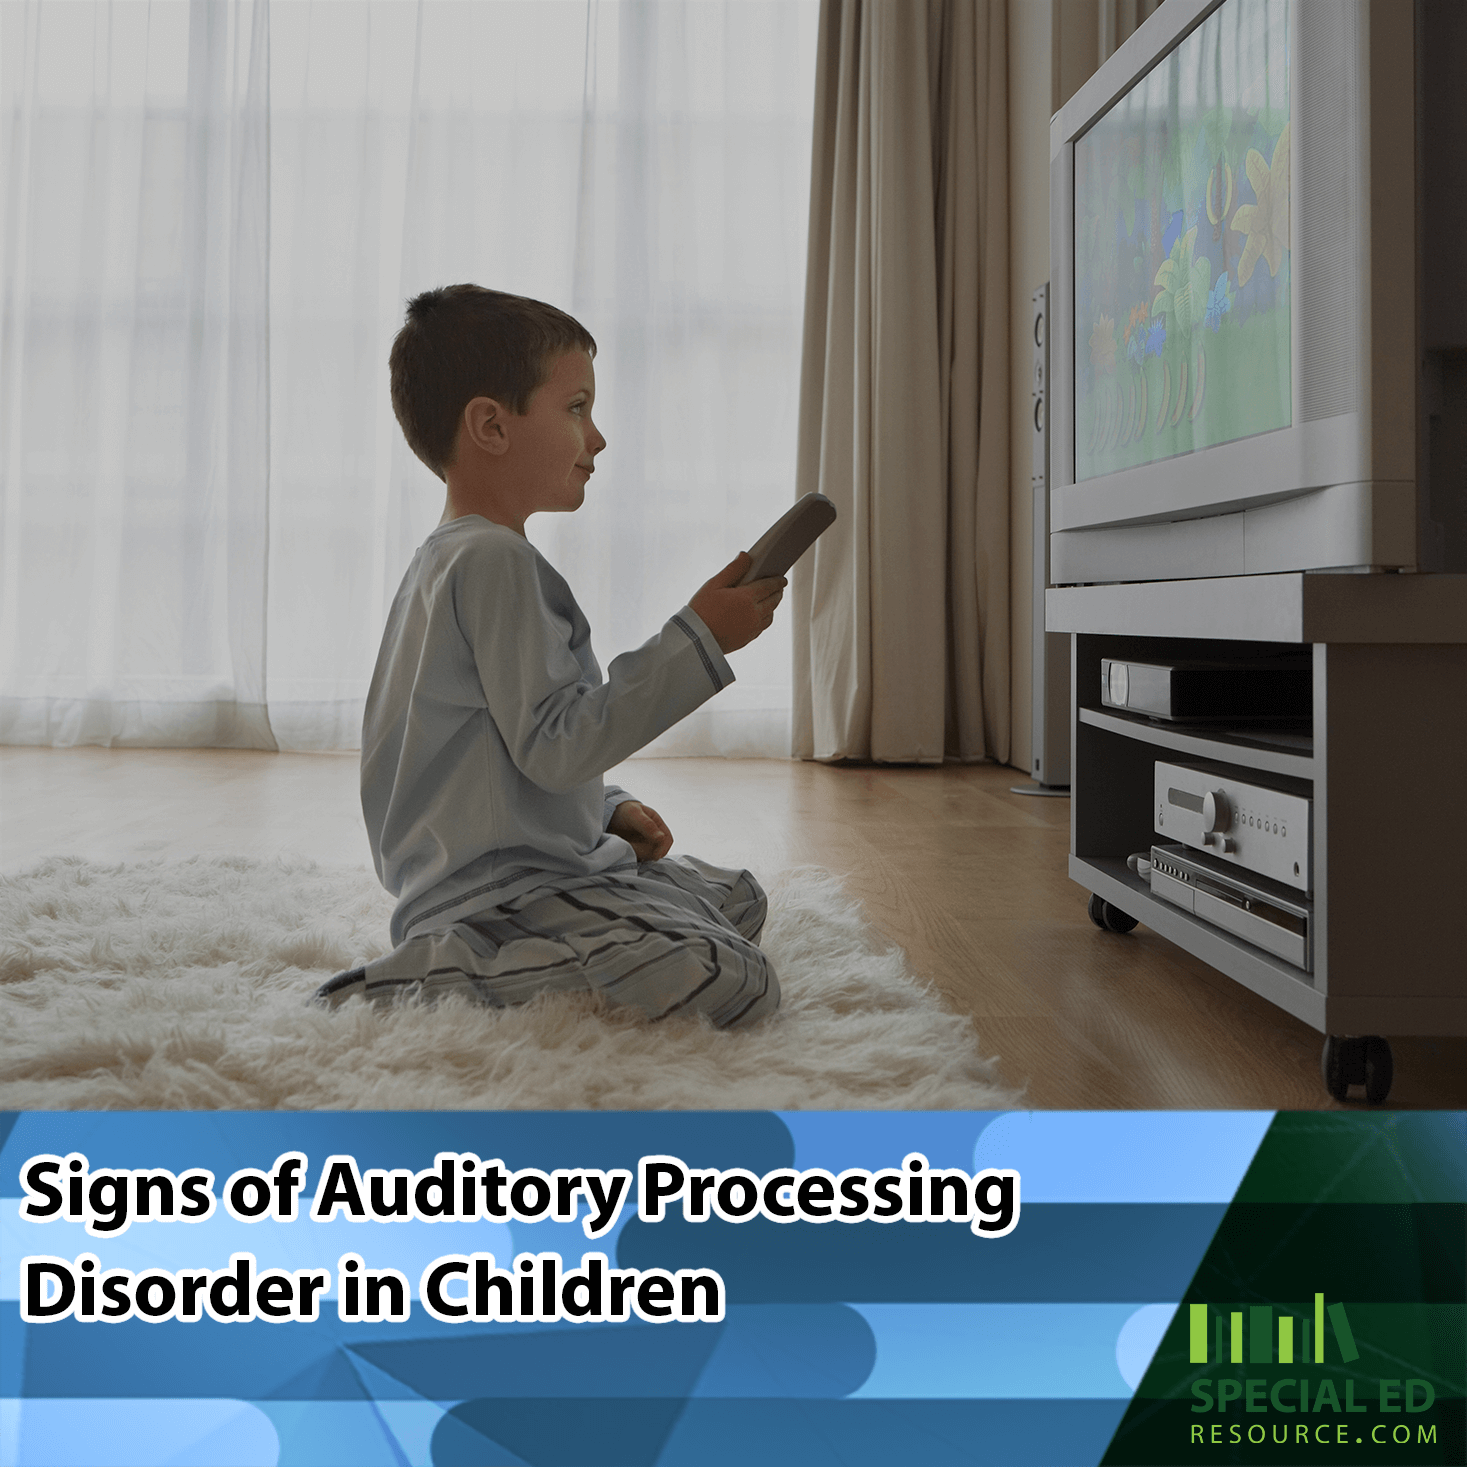 A young boy sits cross-legged on a fluffy rug, holding a remote and watching television, with a look of concentration. Text overlay reads 'Signs of Auditory Processing Disorder in Children' with the logo for SpecialEdResource.com at the bottom.